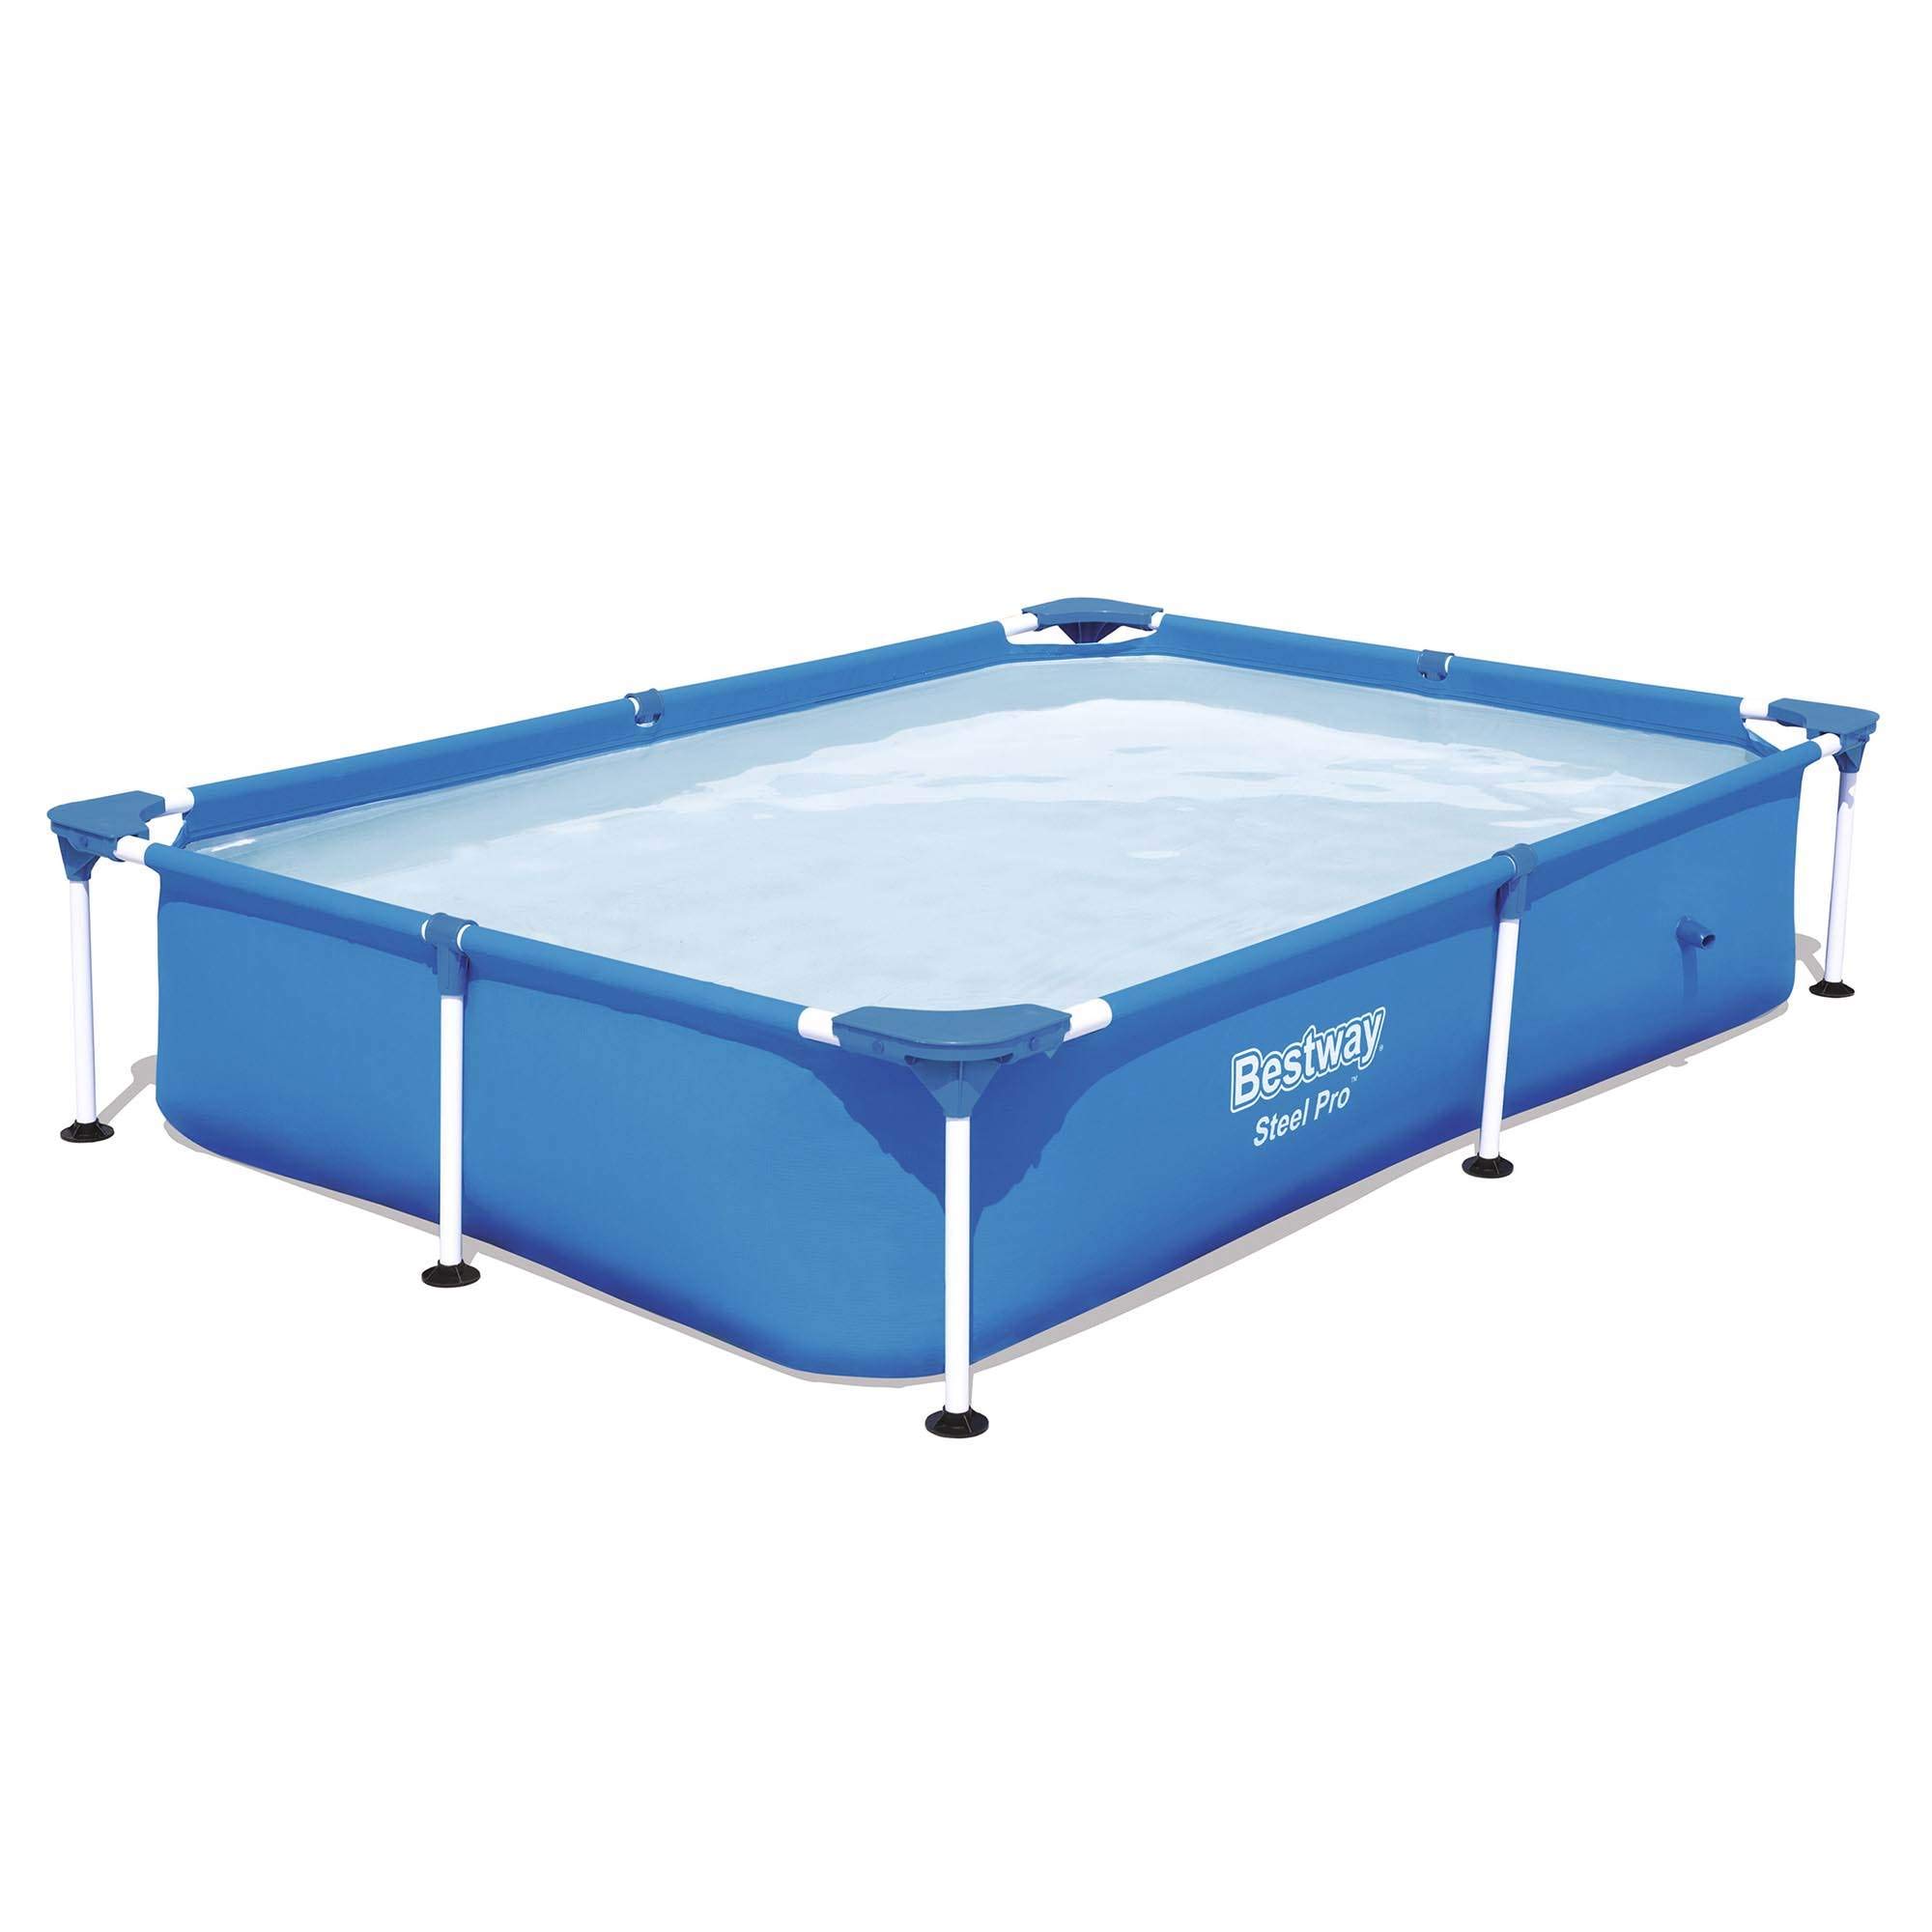 Bestway Steel Pro 87 Inch x 59 Inch x 17 Inch Rectangular Metal Frame Above Ground Outdoor Backyard Swimming Pool Blue Pool